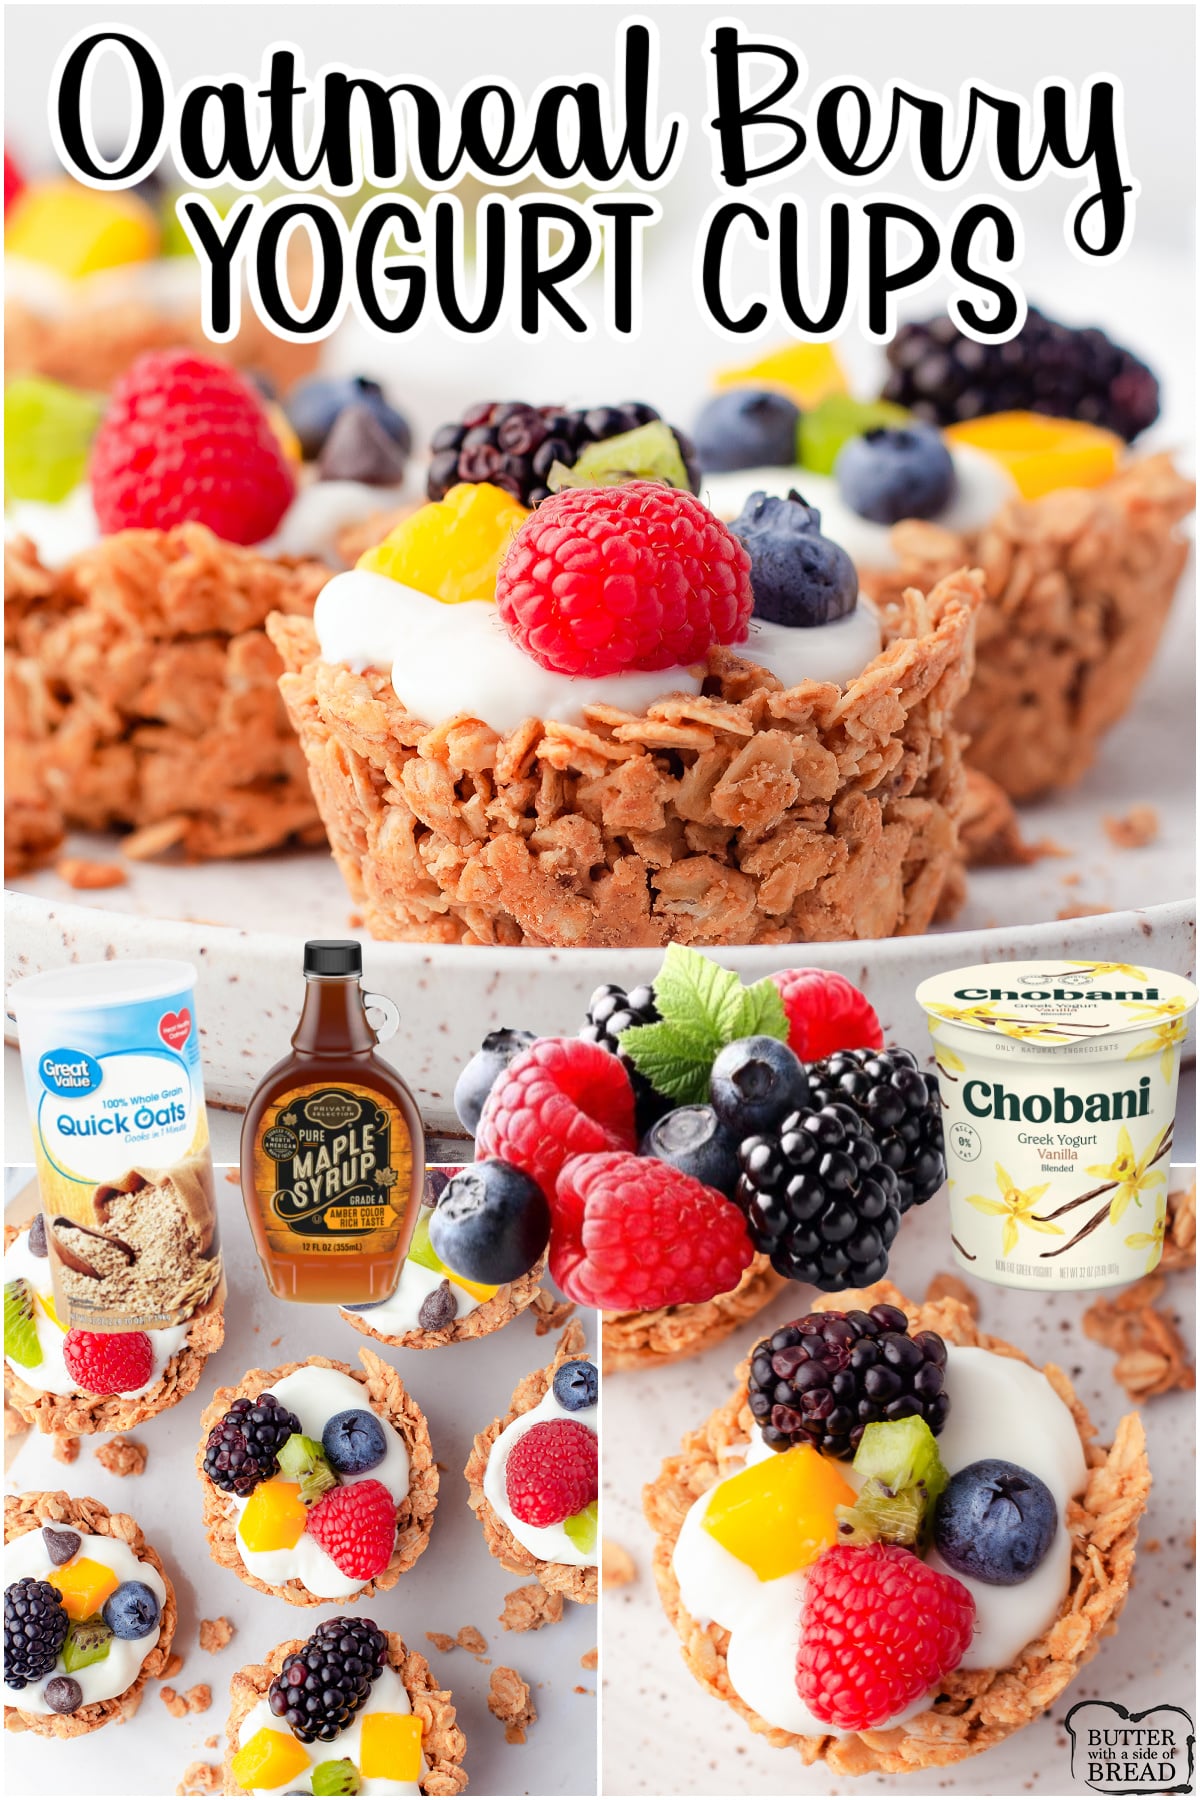 Oatmeal Yogurt Cups made easily with oats, peanut butter, maple syrup & cinnamon! Baked, then topped with Greek yogurt & berries, for an easy breakfast or snack!